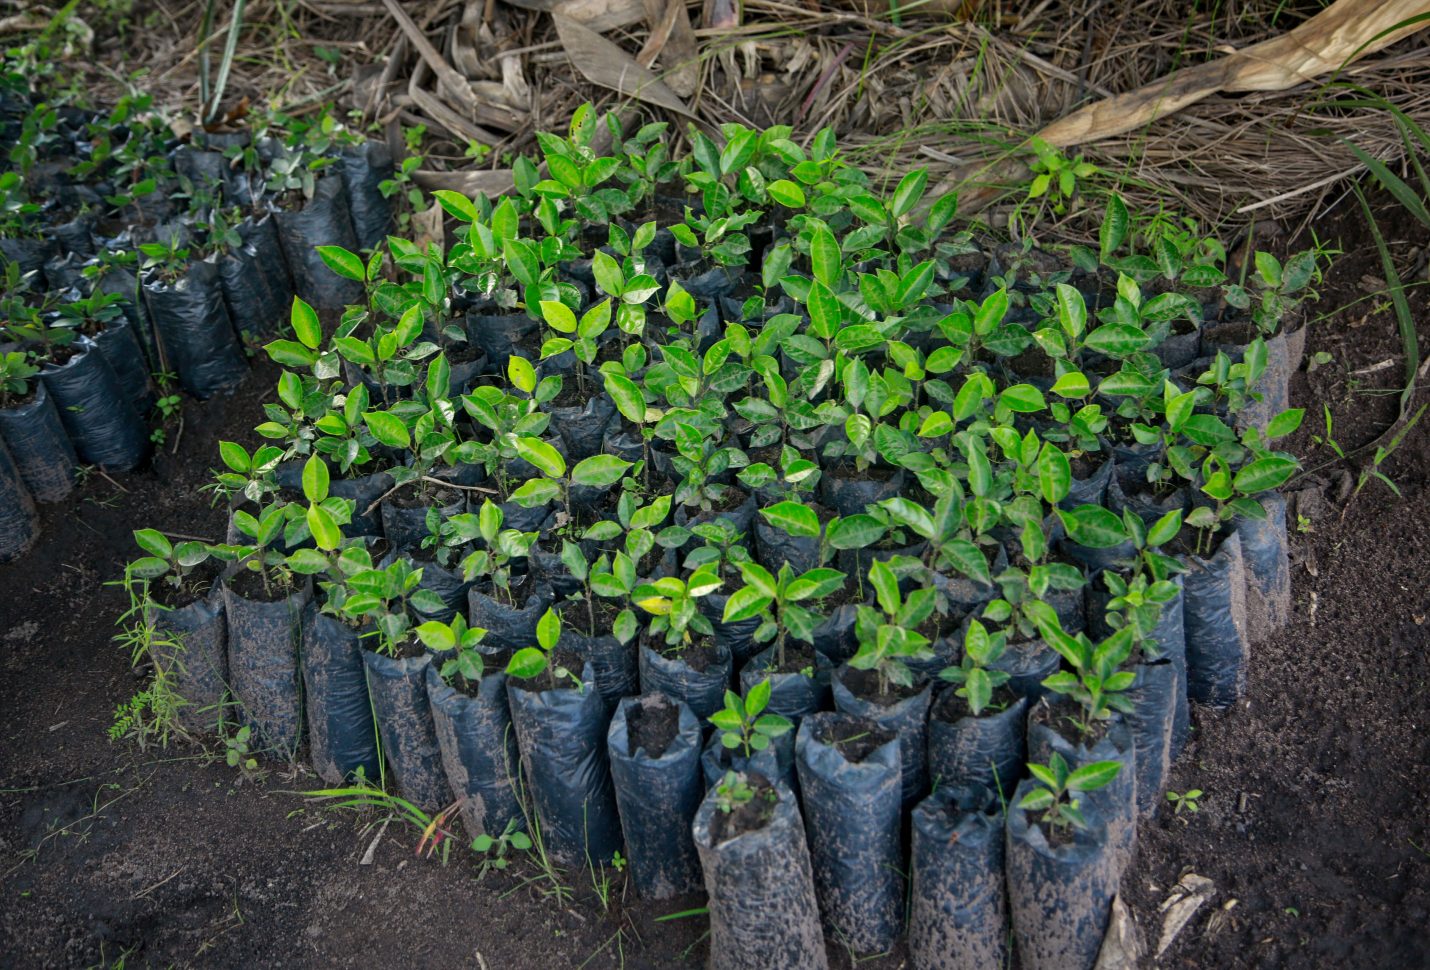 UNDP, GEF join hands to help Angola maintain charcoal industry in sustainable way